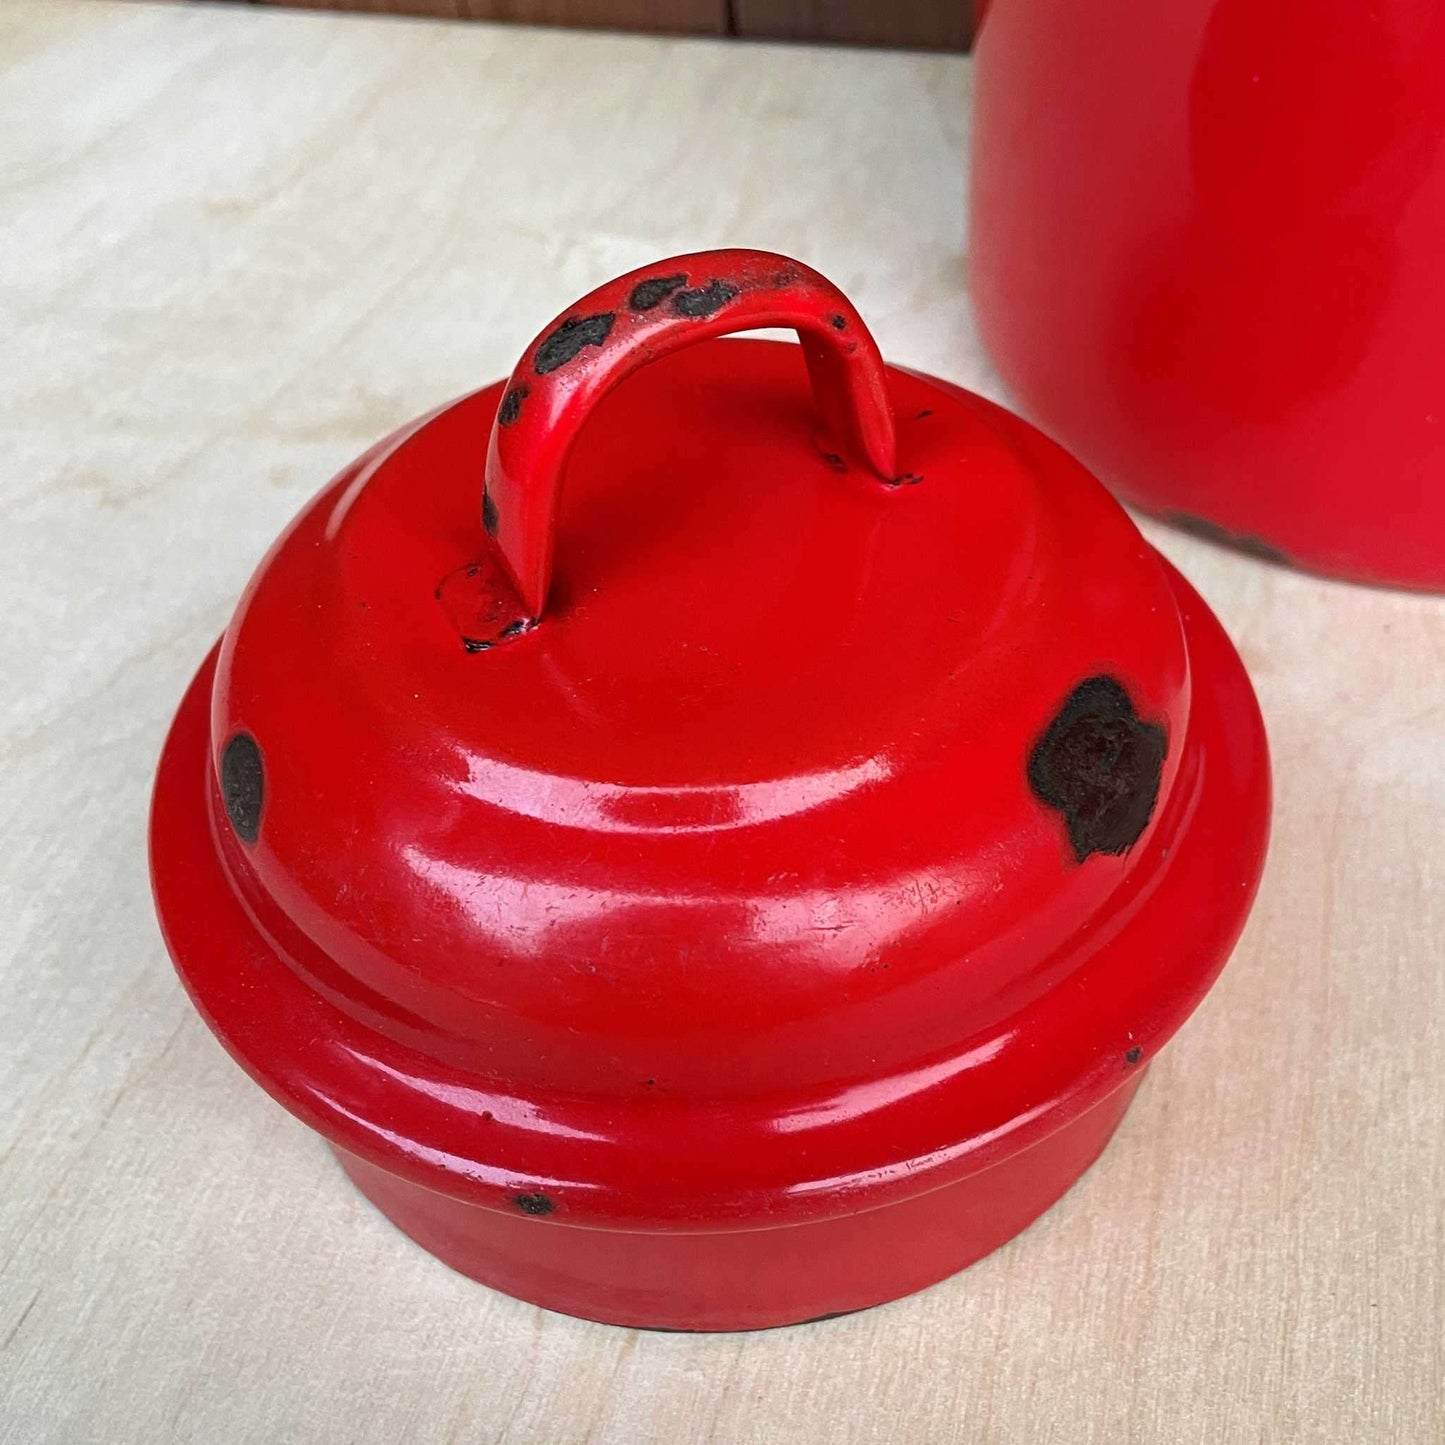 Red enamelled churn container with lid.